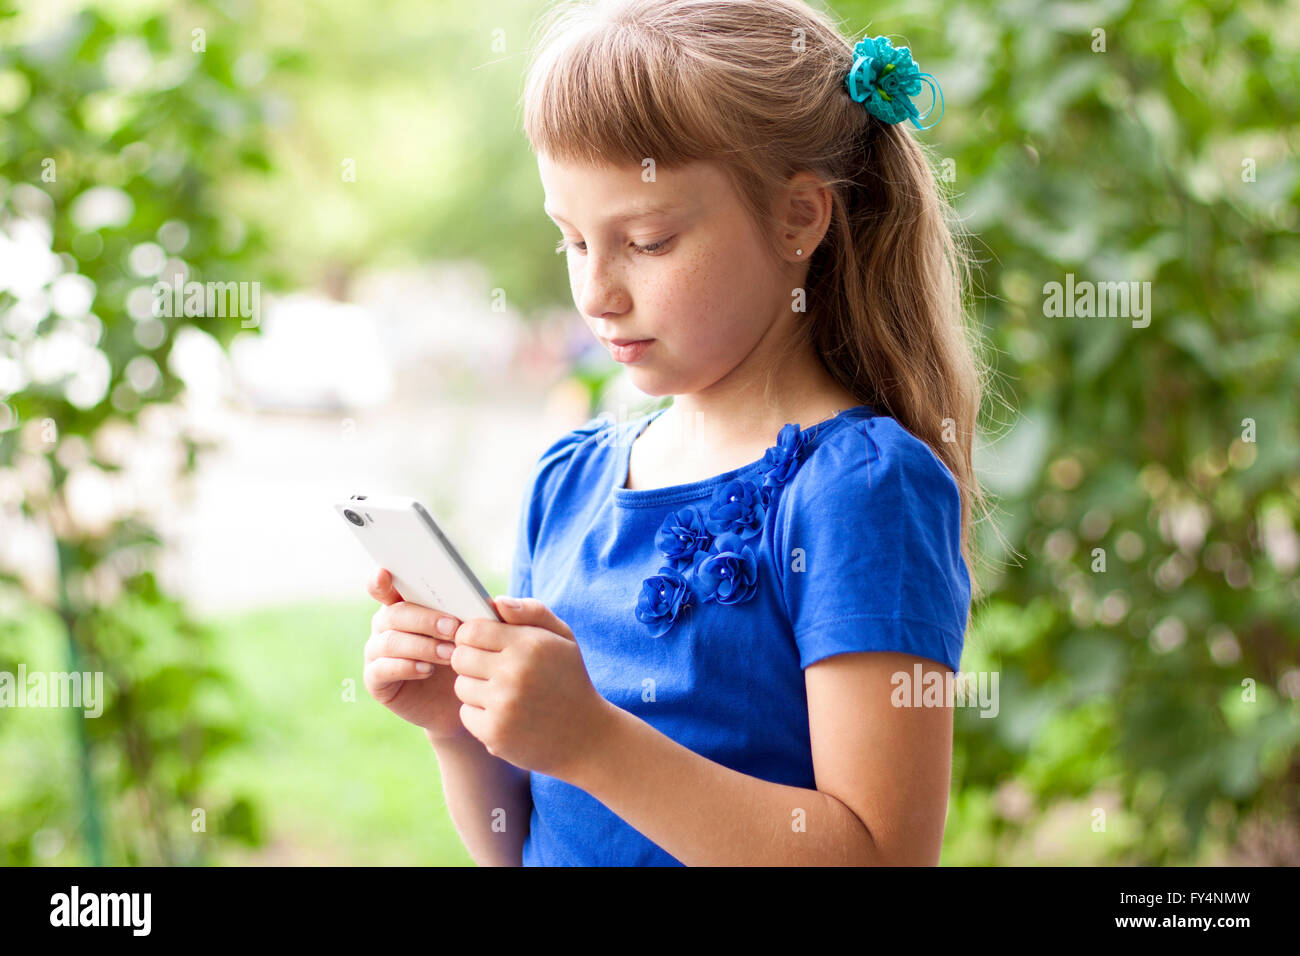 A Little Girl in a Short Summer Dress. Stock Photo - Image of childhood,  cheerful: 126046730